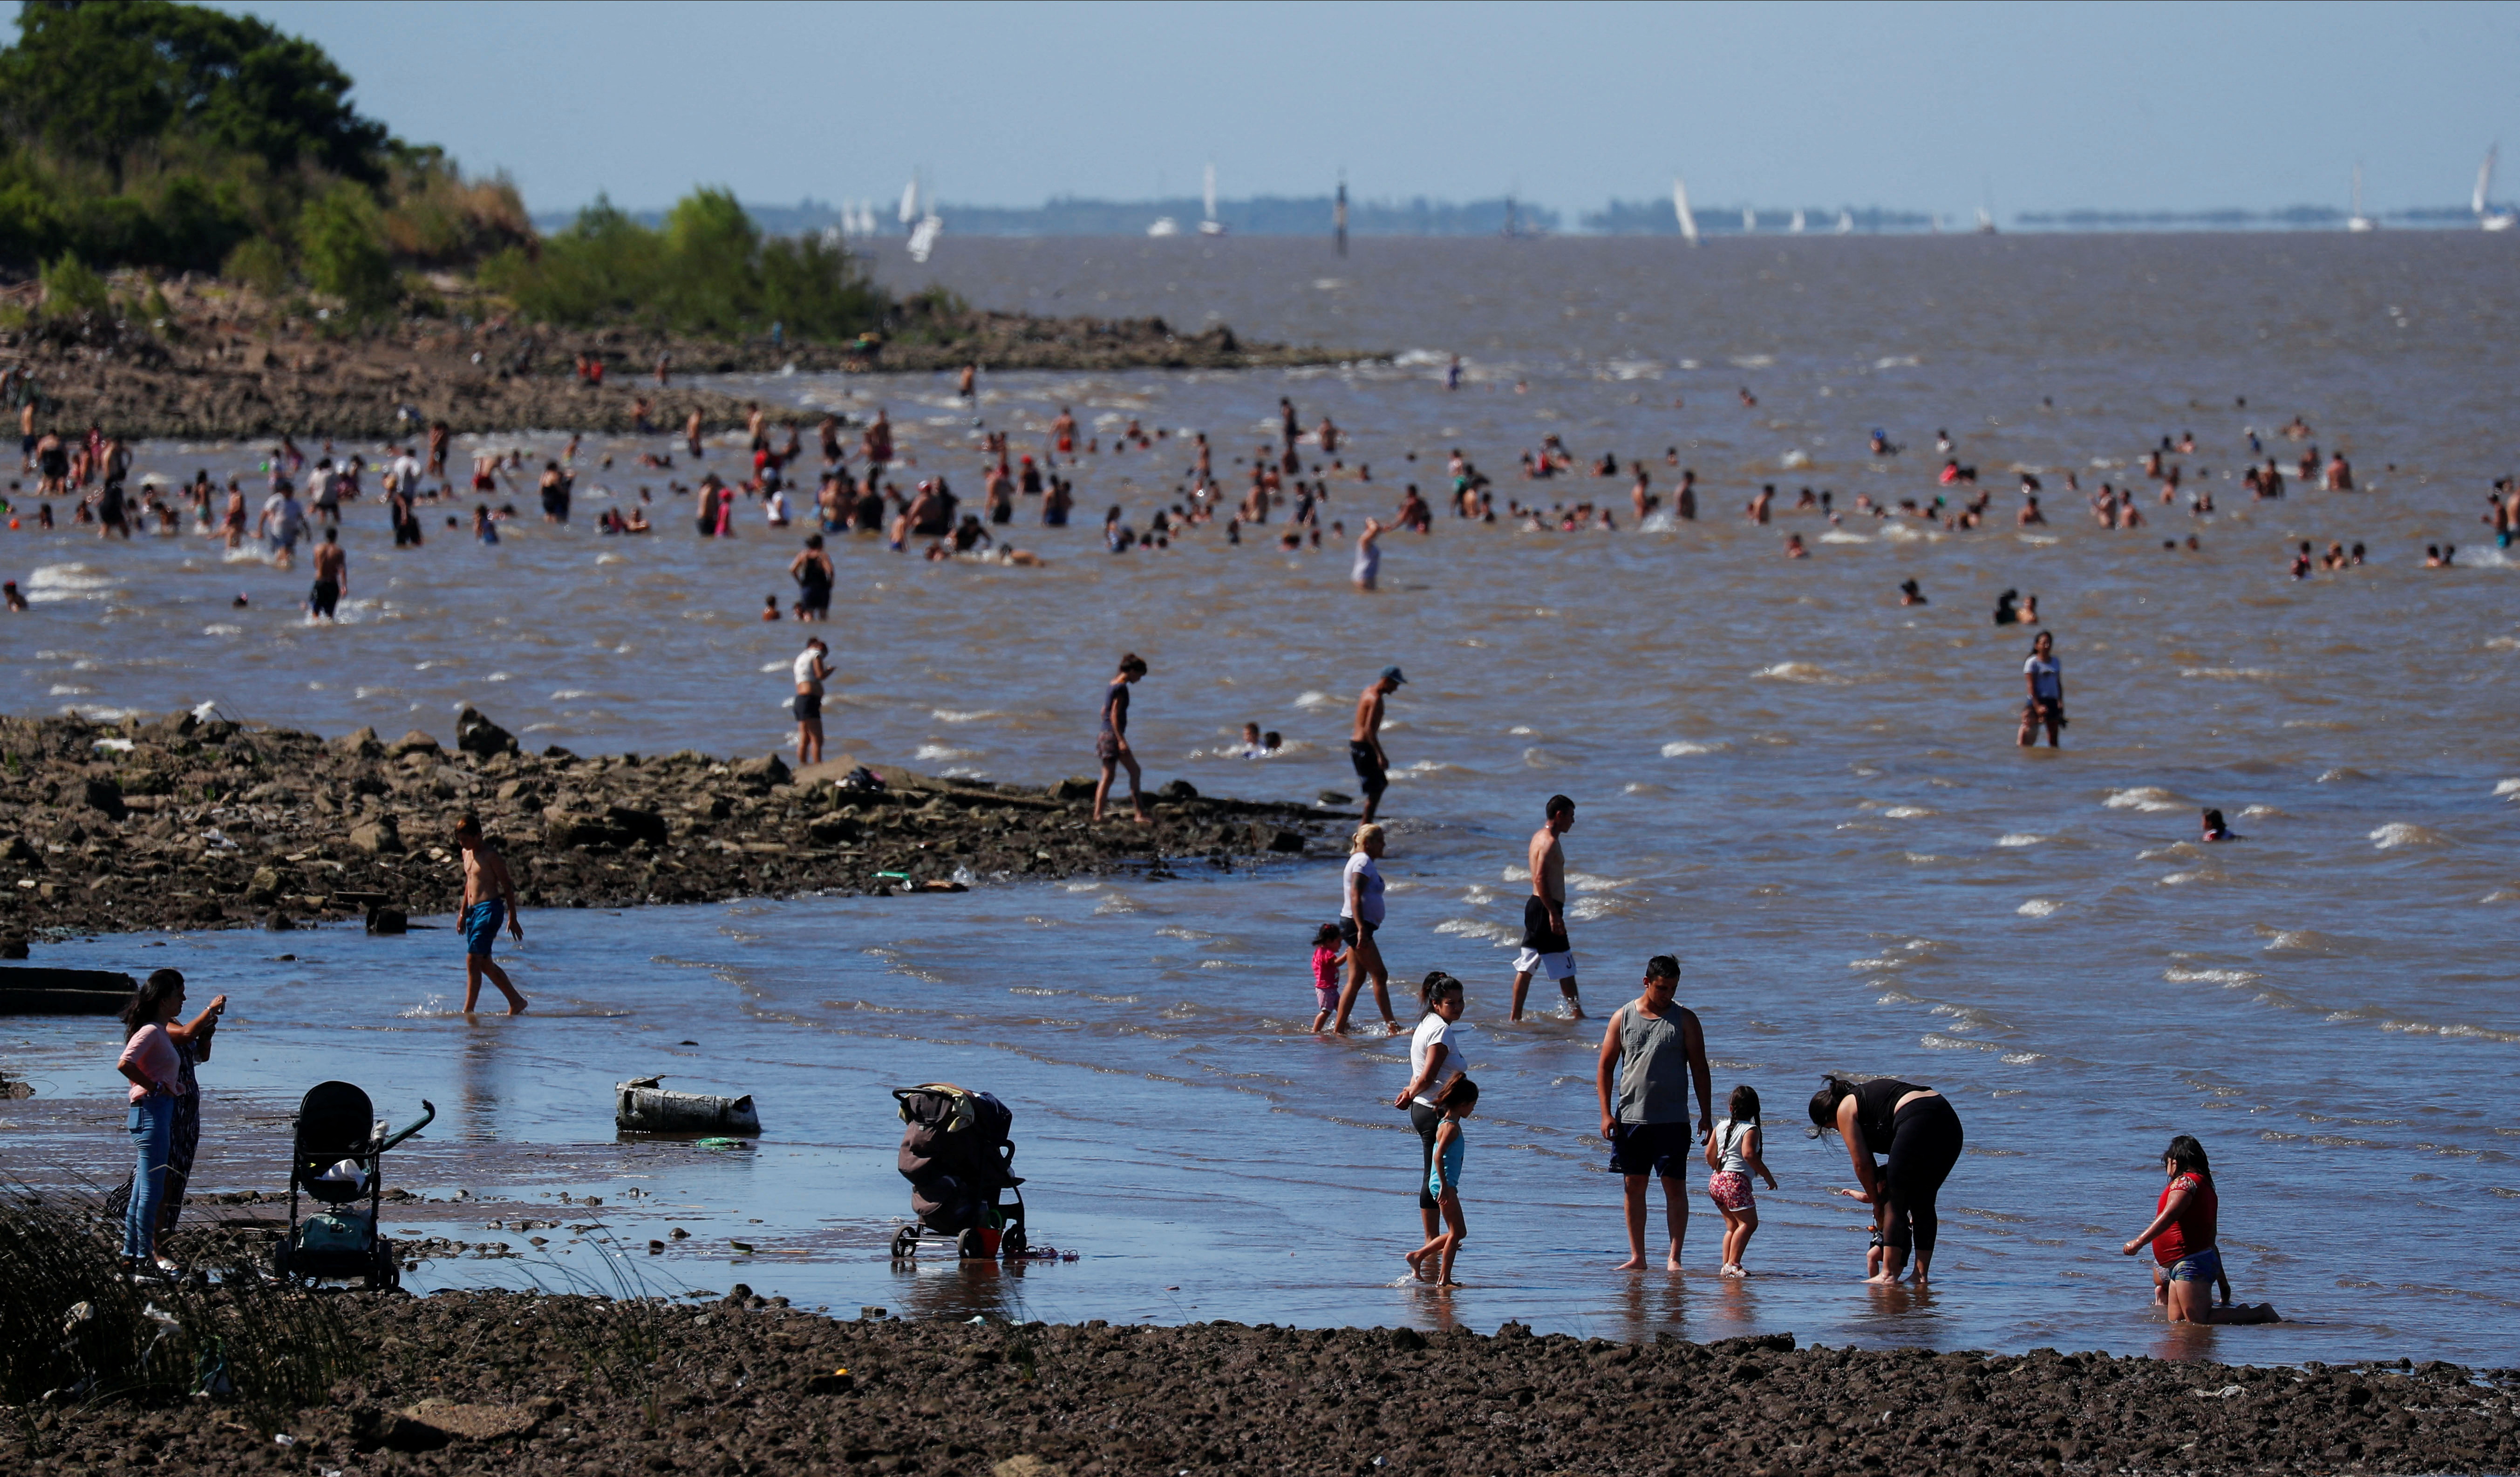 People enjoy the day in the Rio de la Plata river during a heat wave amid a spike of the coronavirus disease (COVID-19) cases, in Buenos Aires, Argentina January 9, 2022. REUTERS/Agustin Marcarian